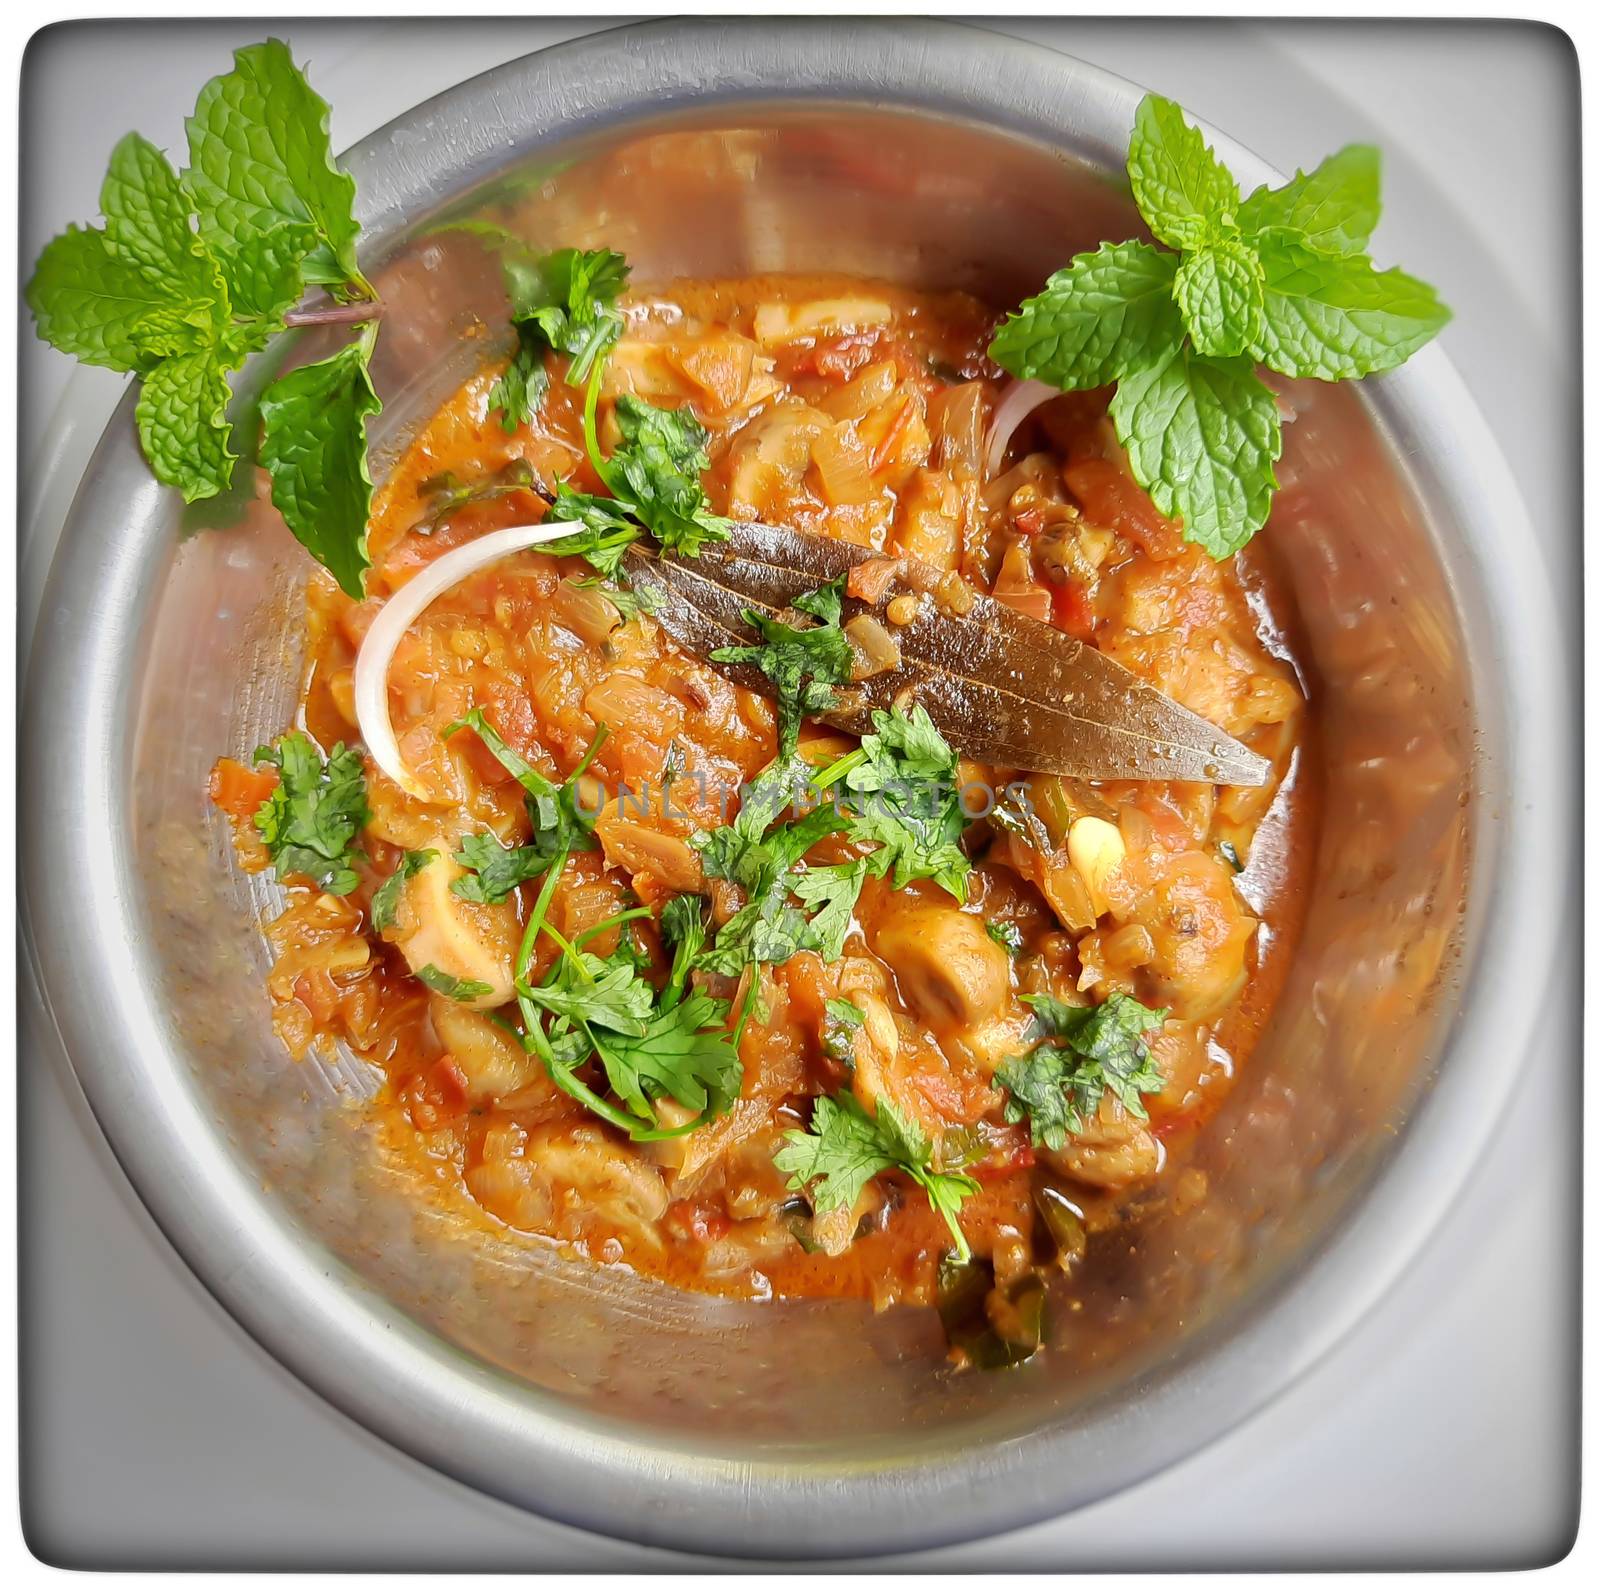 Colorful Delicious yummy indian spicy mushroom gravy in white bowl and it's one of favorite restaurant cuisine food